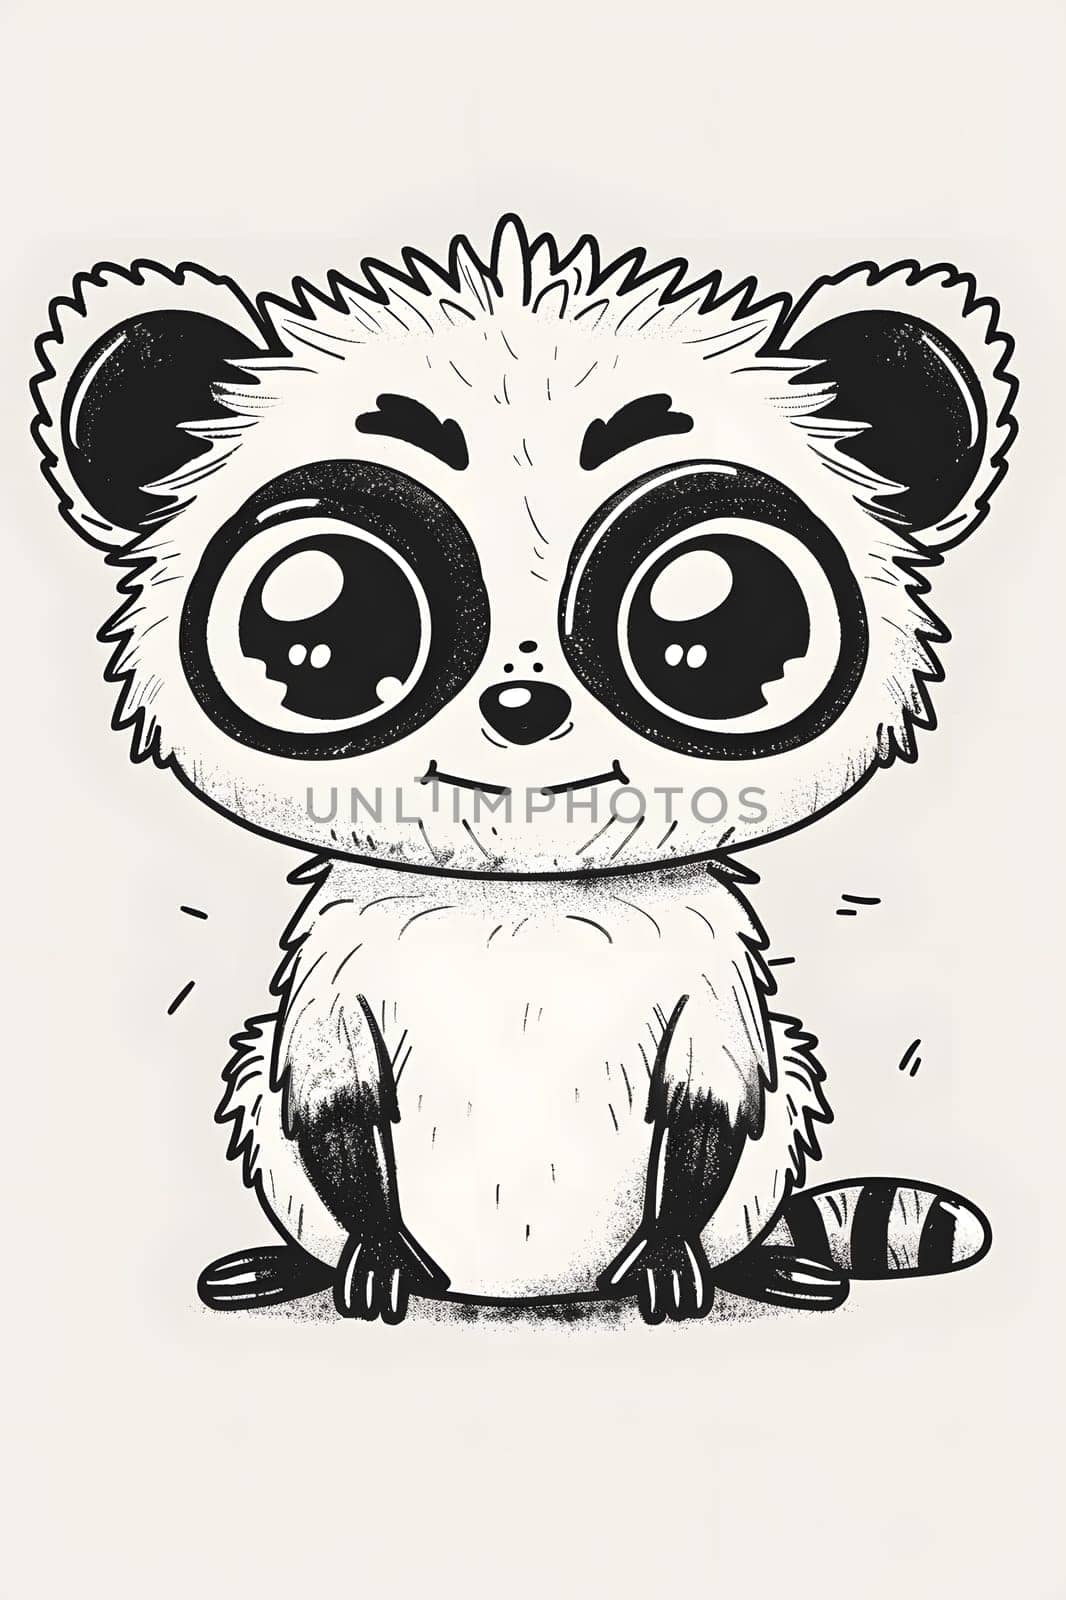 A black and white cartoon drawing of a raccoons head, featuring big eyes. The style is simplistic and the eyes are drawn in a cartoonish owllike fashion